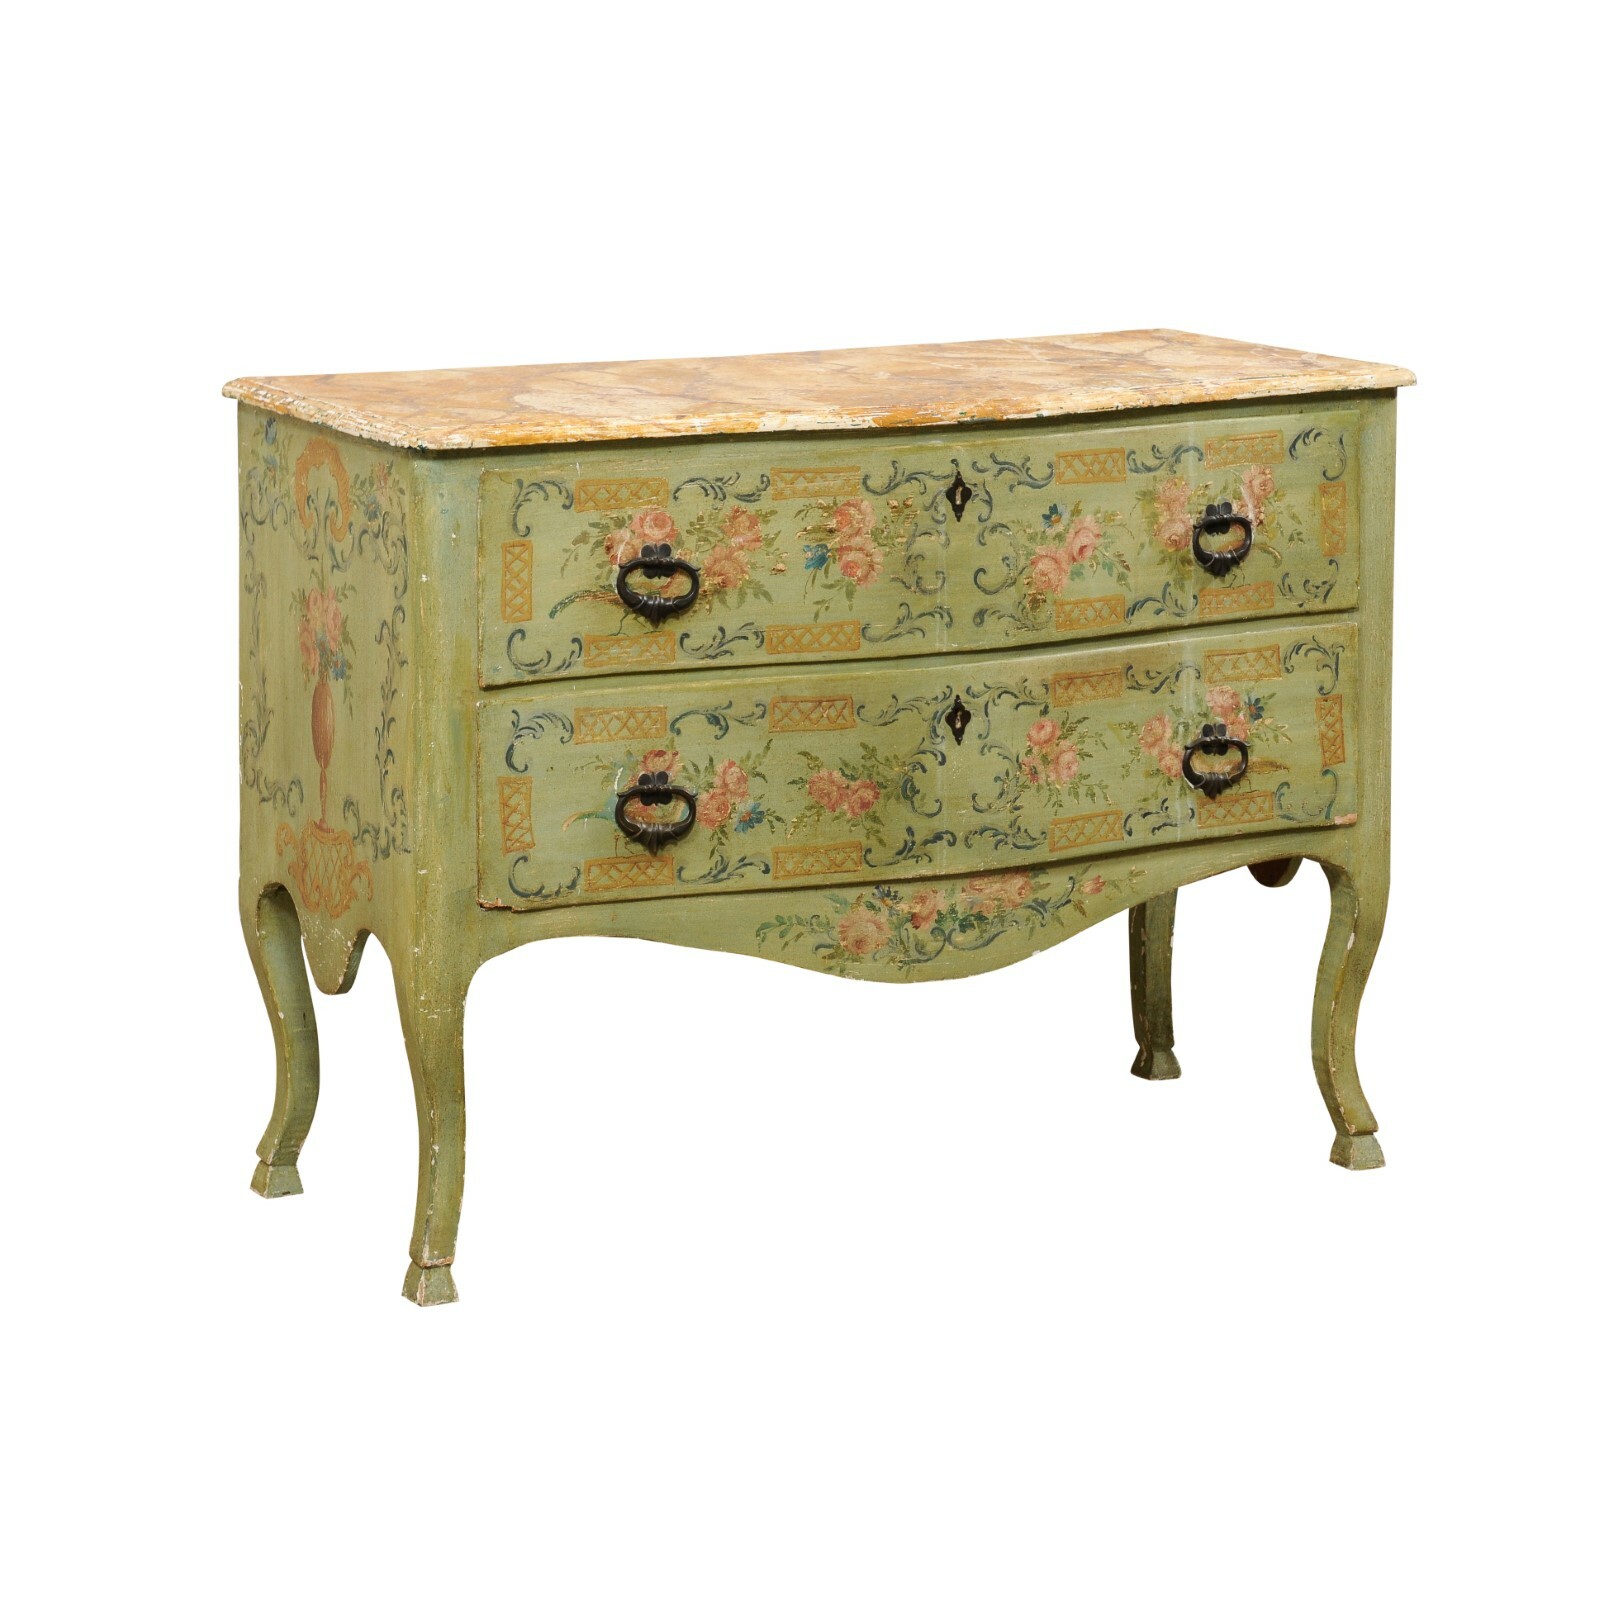 Italian Floral-Painted Chest, Early 19th C.